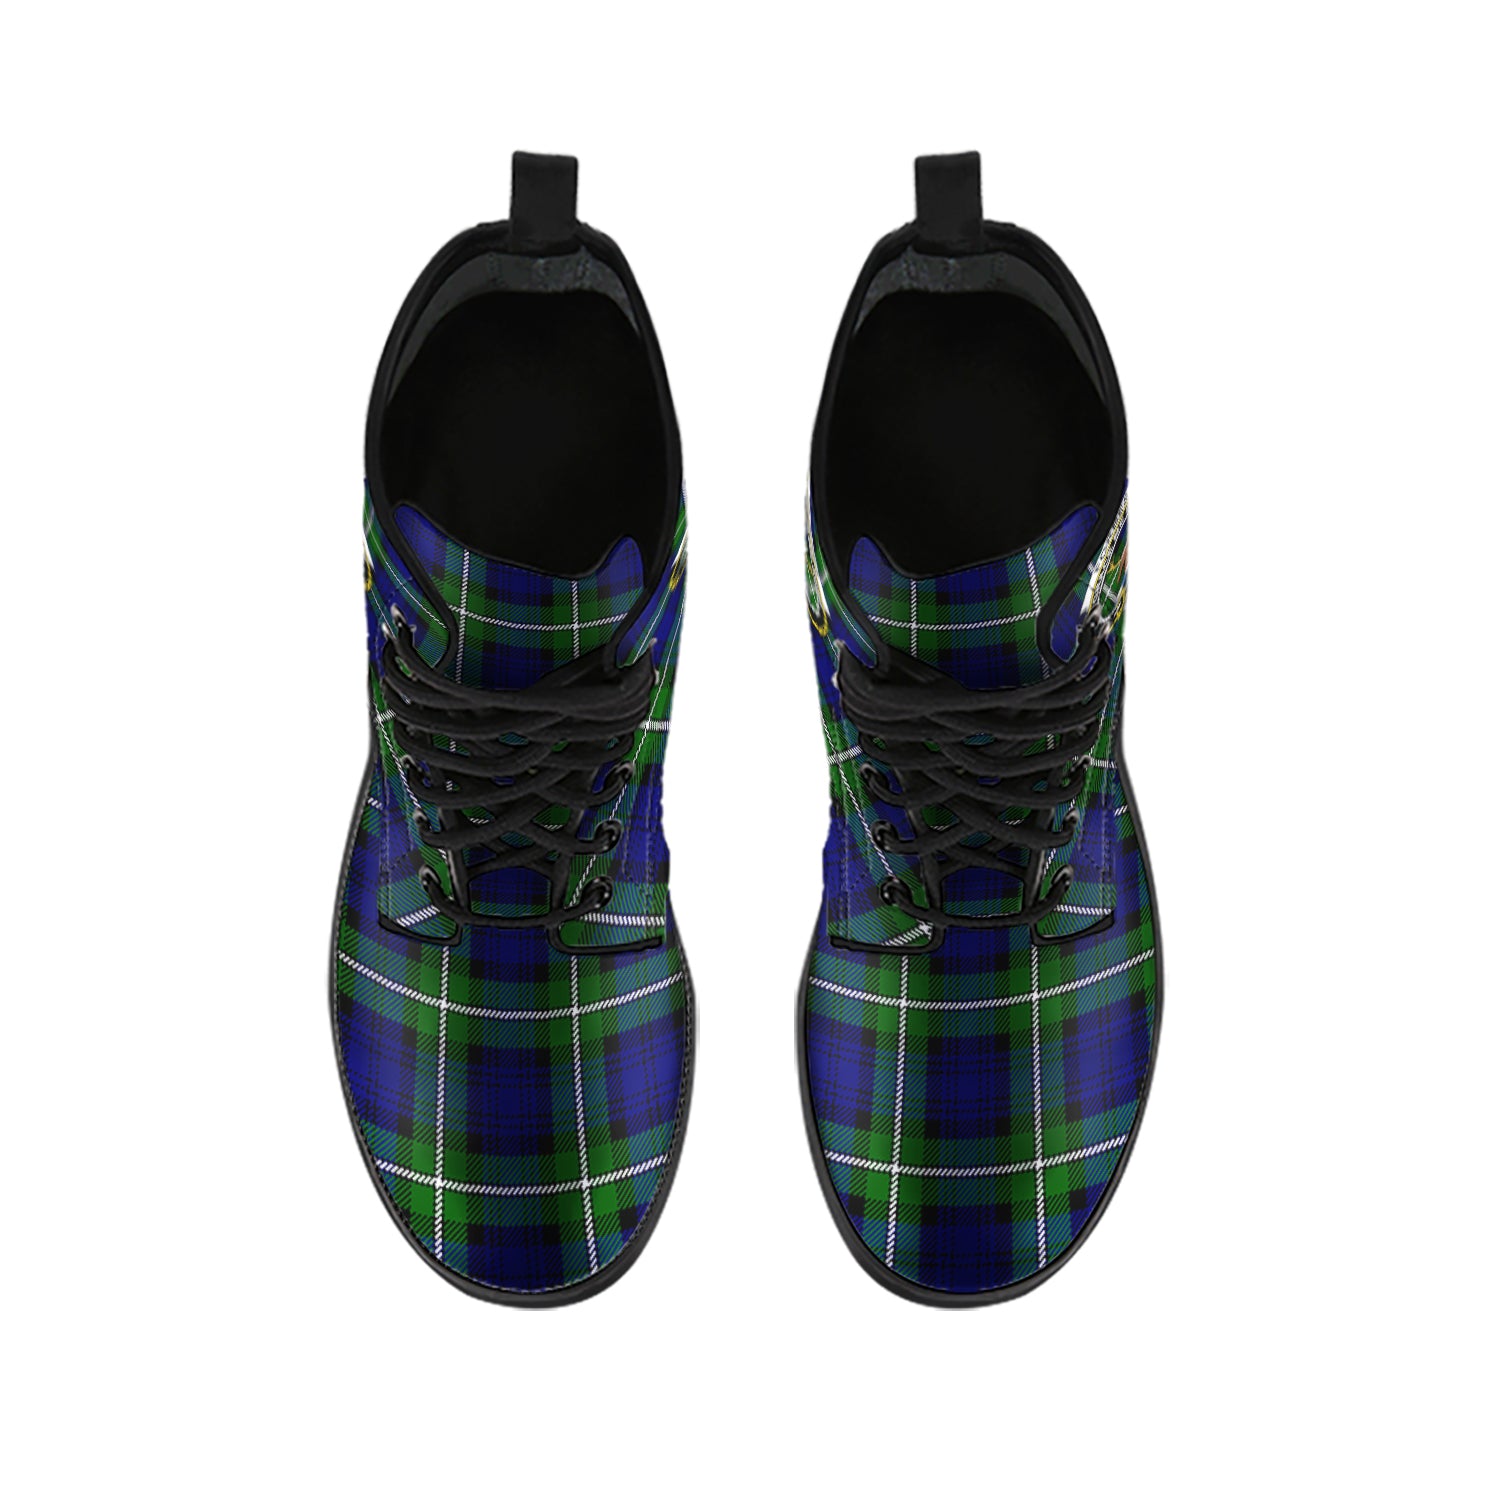 forbes-modern-tartan-leather-boots-with-family-crest